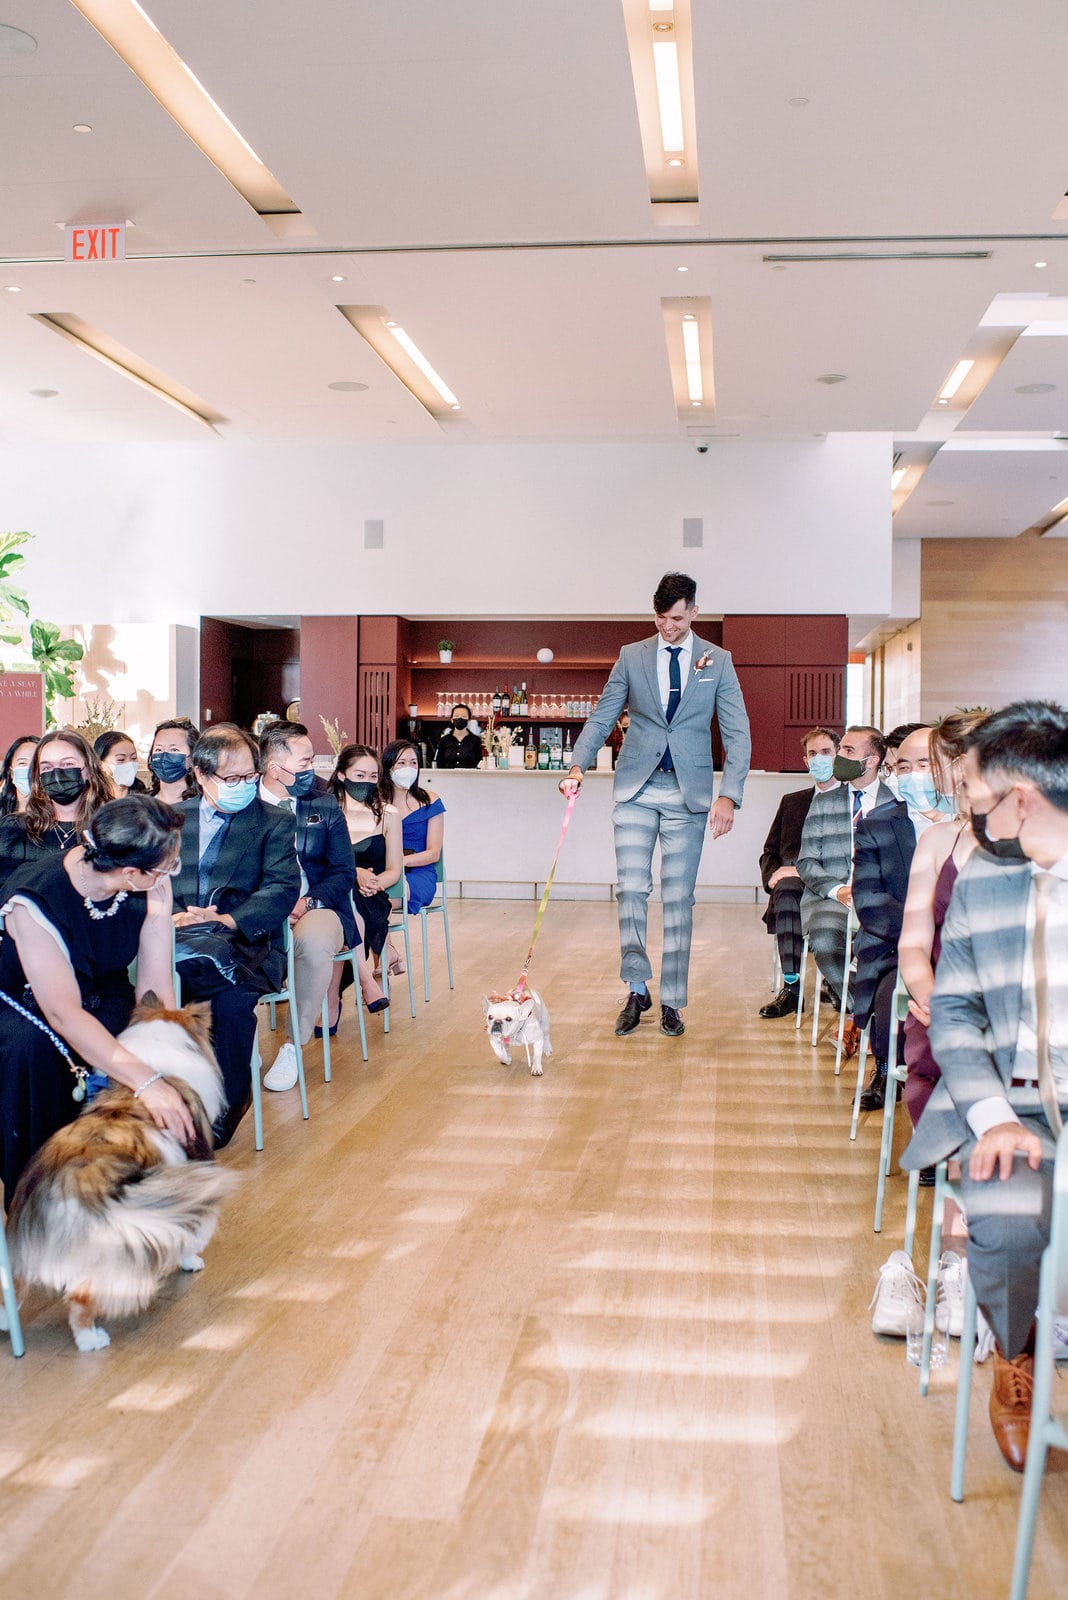 Puppy dog enters ceremony fun sweet candid moment at gardiner museum downtown toronto modern romantic wedding jacqueline james photography